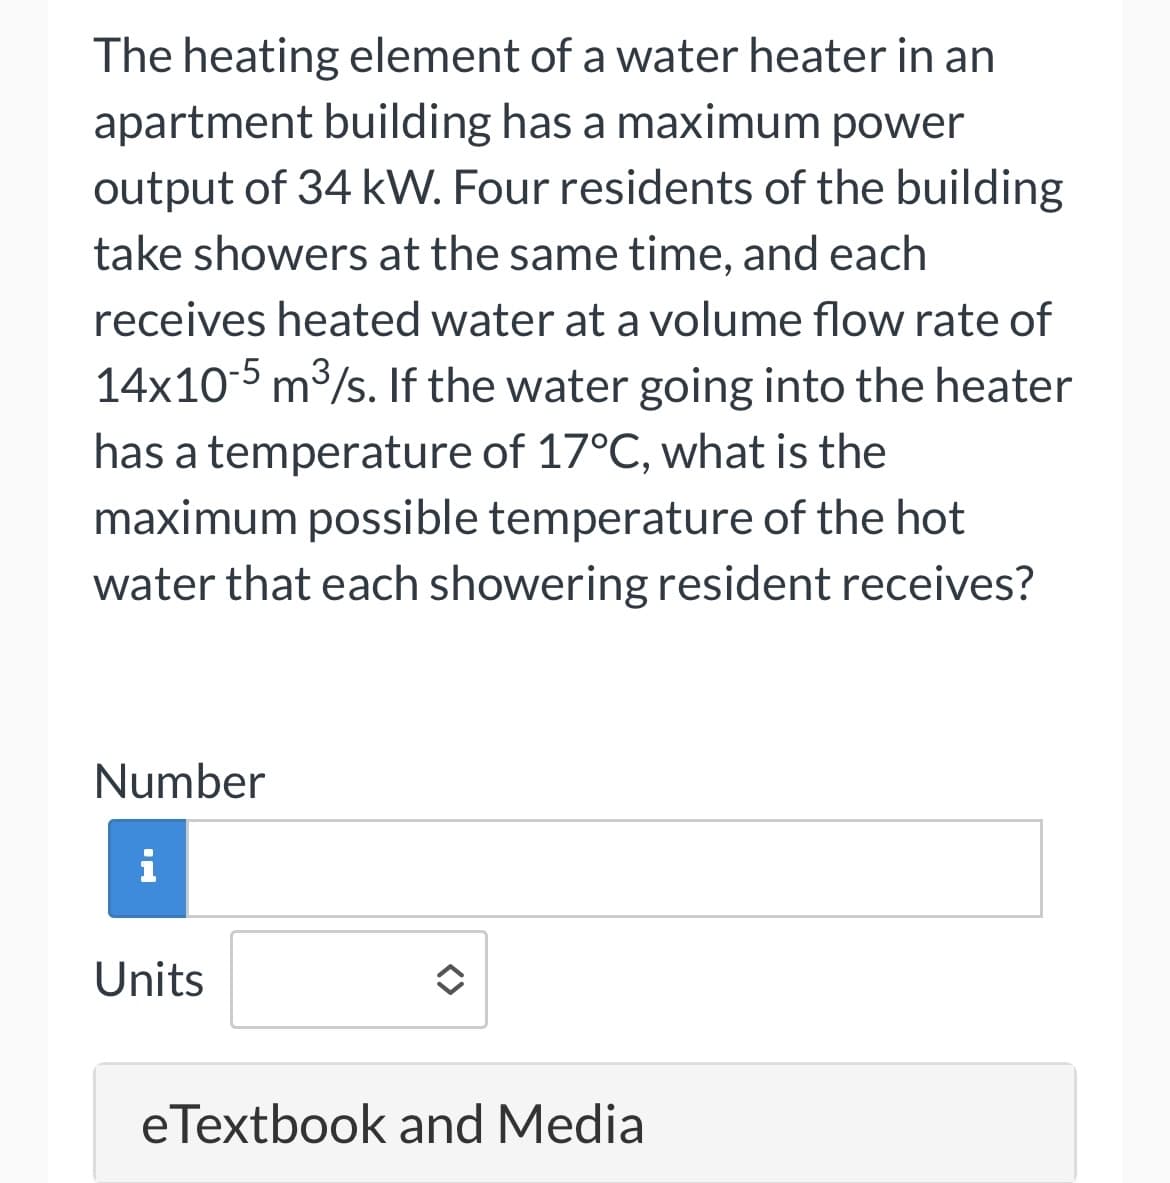 The heating element of a water heater in an
apartment building has a maximum power
output of 34 kW. Four residents of the building
take showers at the same time, and each
receives heated water at a volume flow rate of
14x10-5 m³/s. If the water going into the heater
has a temperature of 17°C, what is the
maximum possible temperature of the hot
water that each showering resident receives?
Number
i
Units
eTextbook and Media